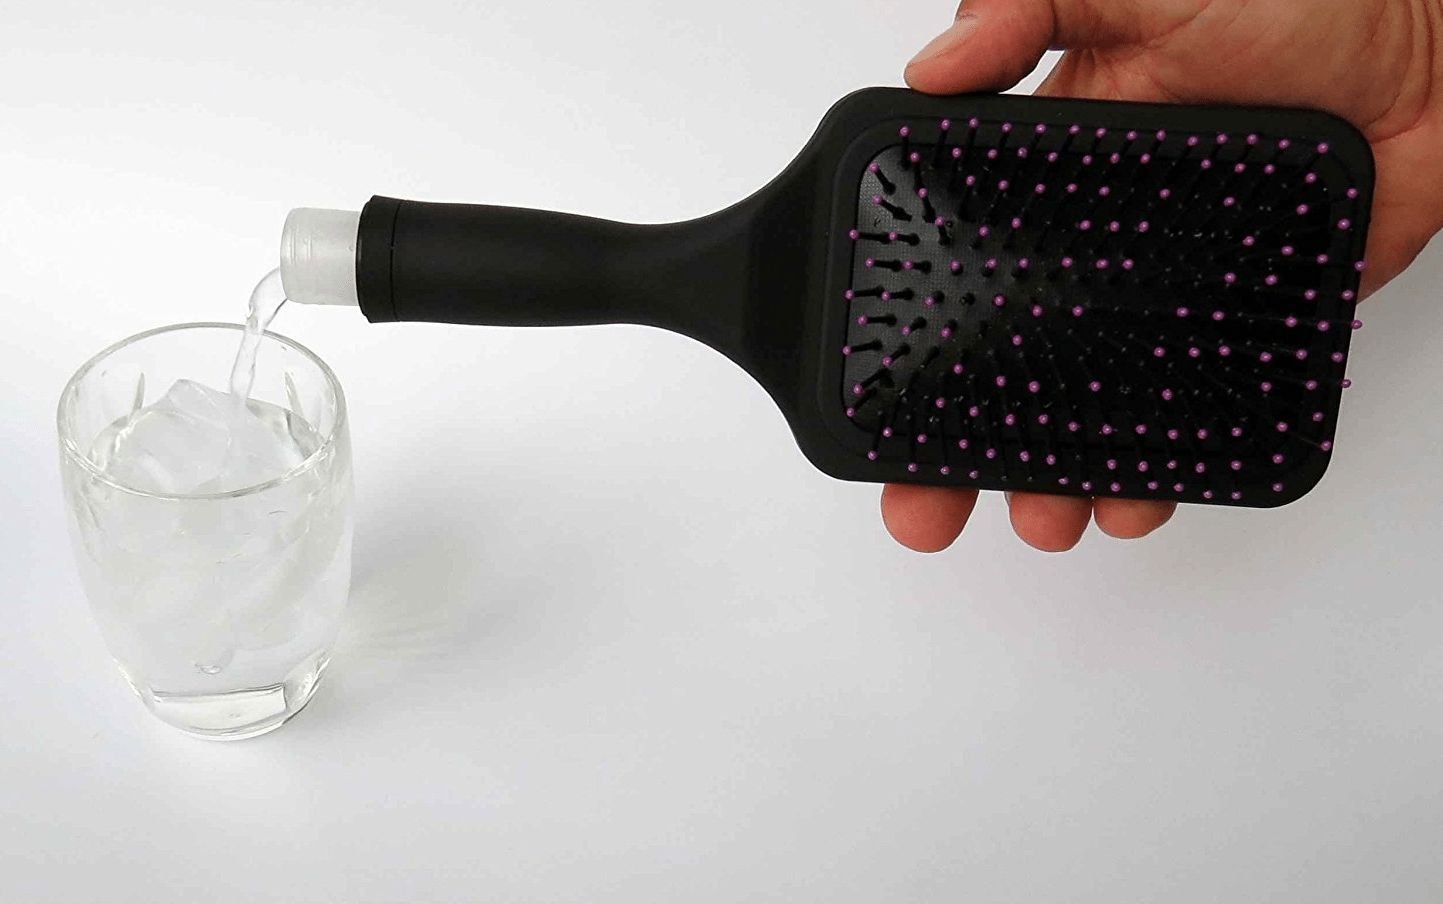 This bra has a secret container so you can smuggle booze into a festival 